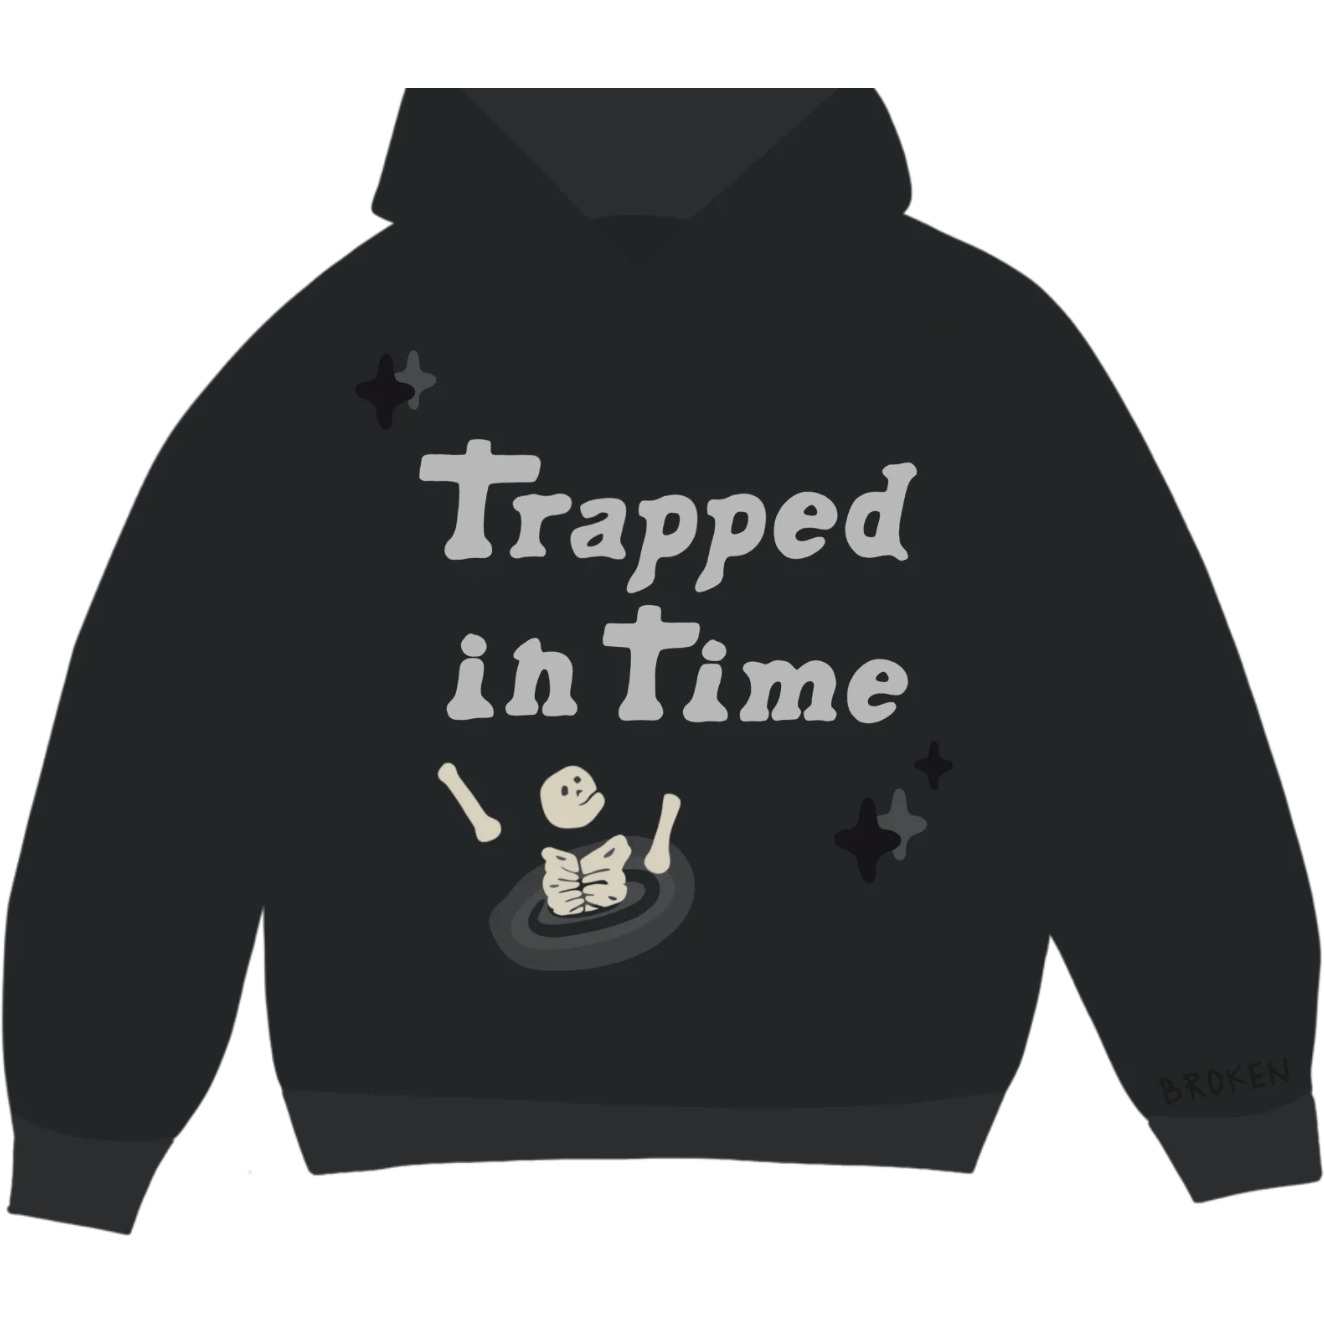 BROKEN PLANET 'TRAPPED IN TIME' SOOT BLACK TRACKSUIT